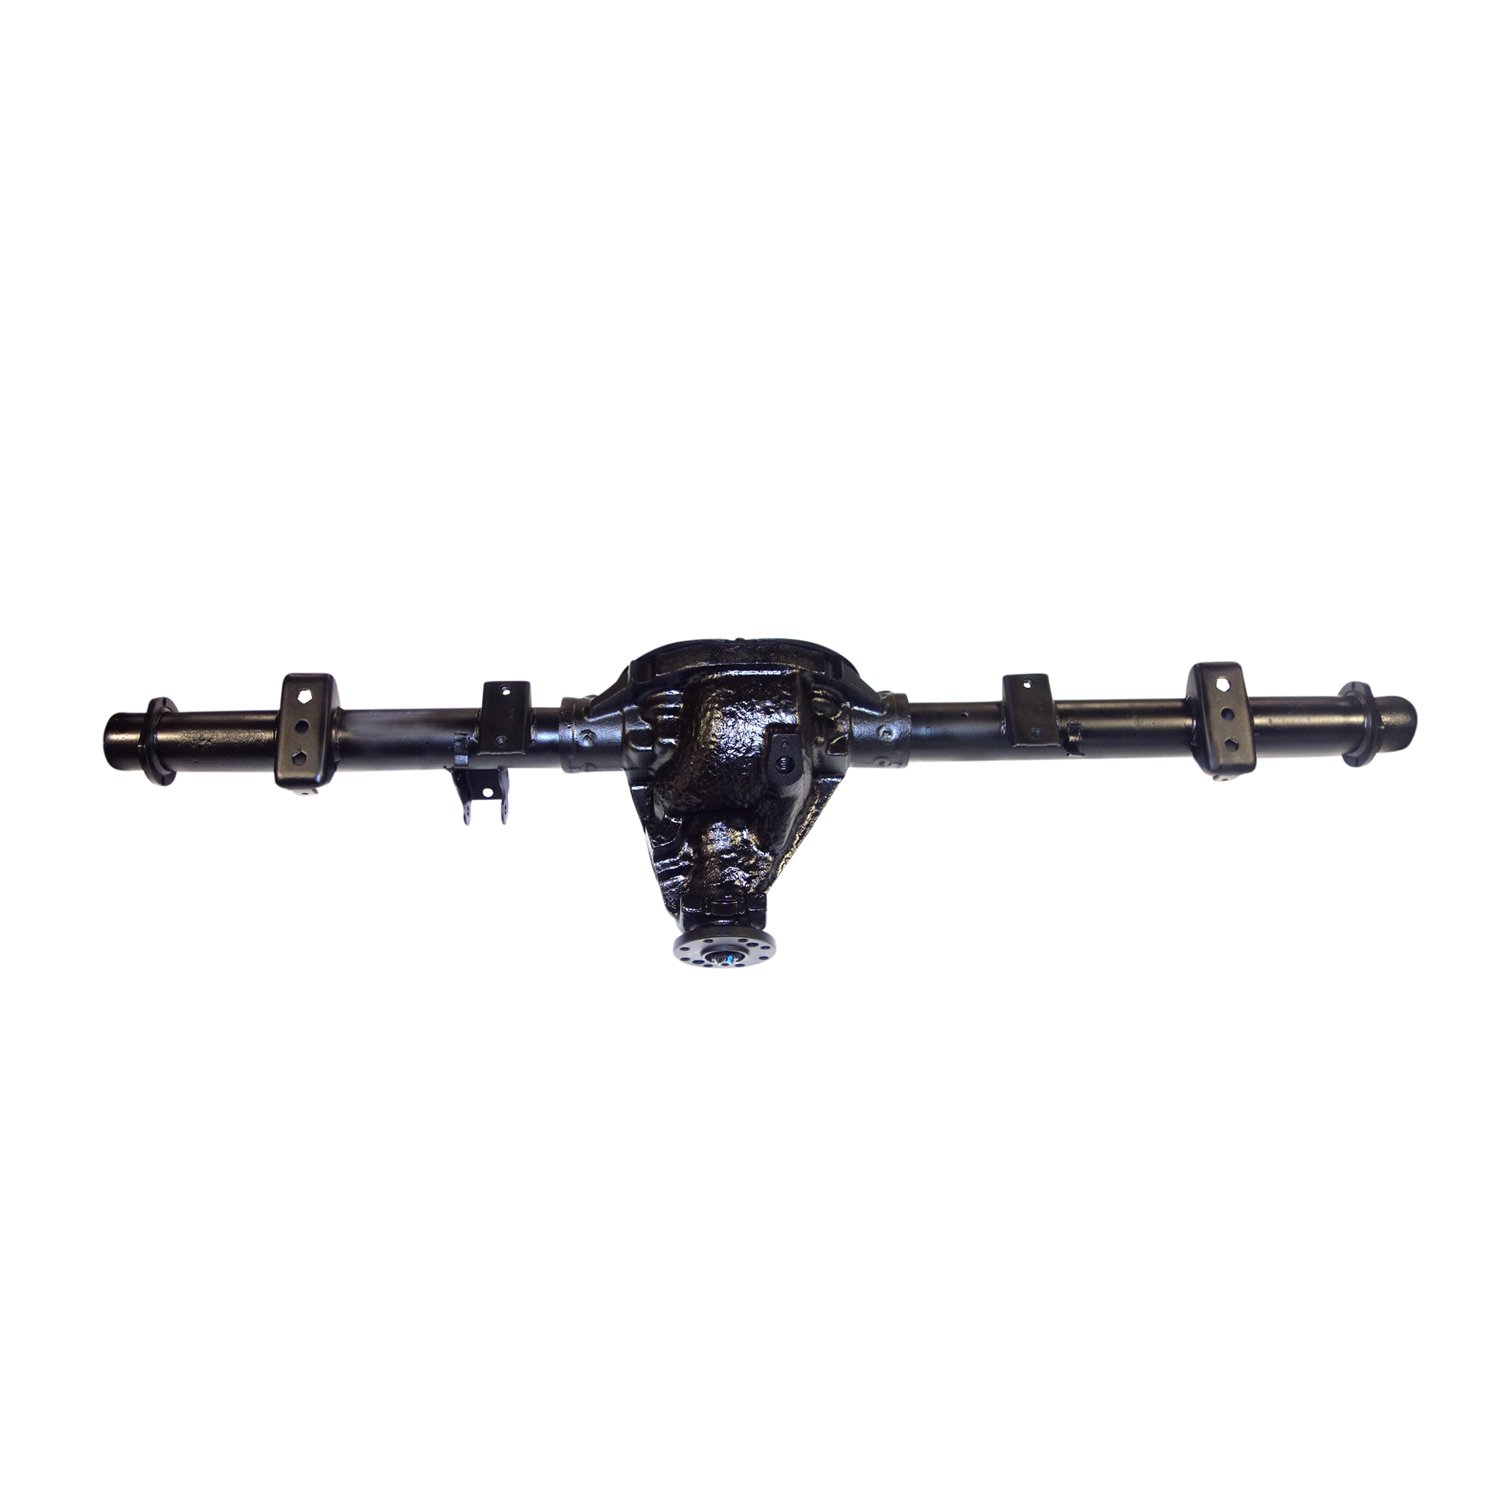 Remanufactured Complete Axle Assembly for Chy 8.25" 98-02 Durango 3.55 , 4x4, Posi LSD